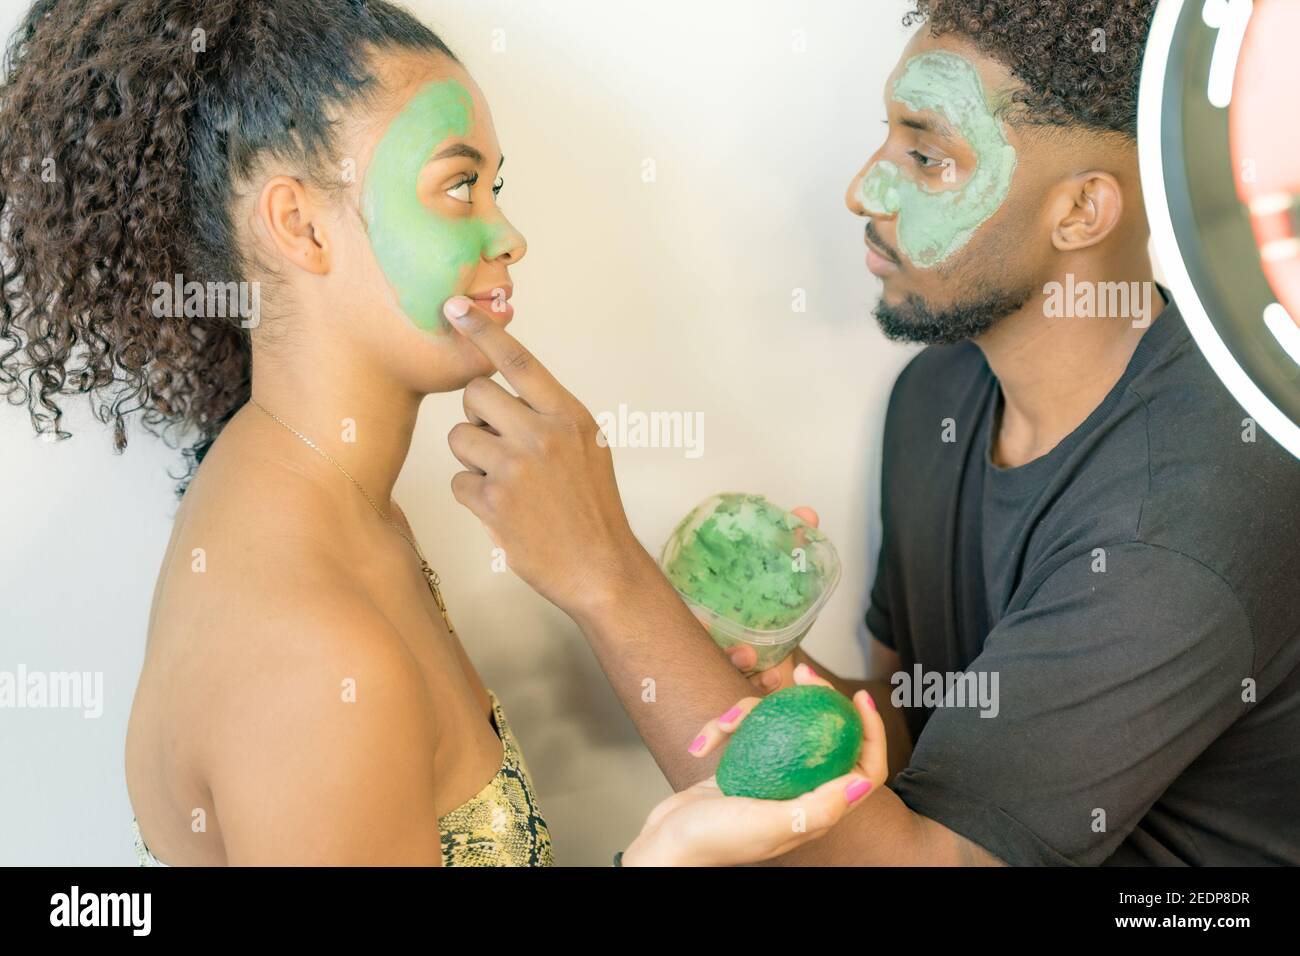 https://c8.alamy.com/comp/2EDP8DR/man-applying-avocado-mask-on-his-girlfriends-face-young-couple-taking-care-of-skin-at-home-health-and-spa-concept-2EDP8DR.jpg